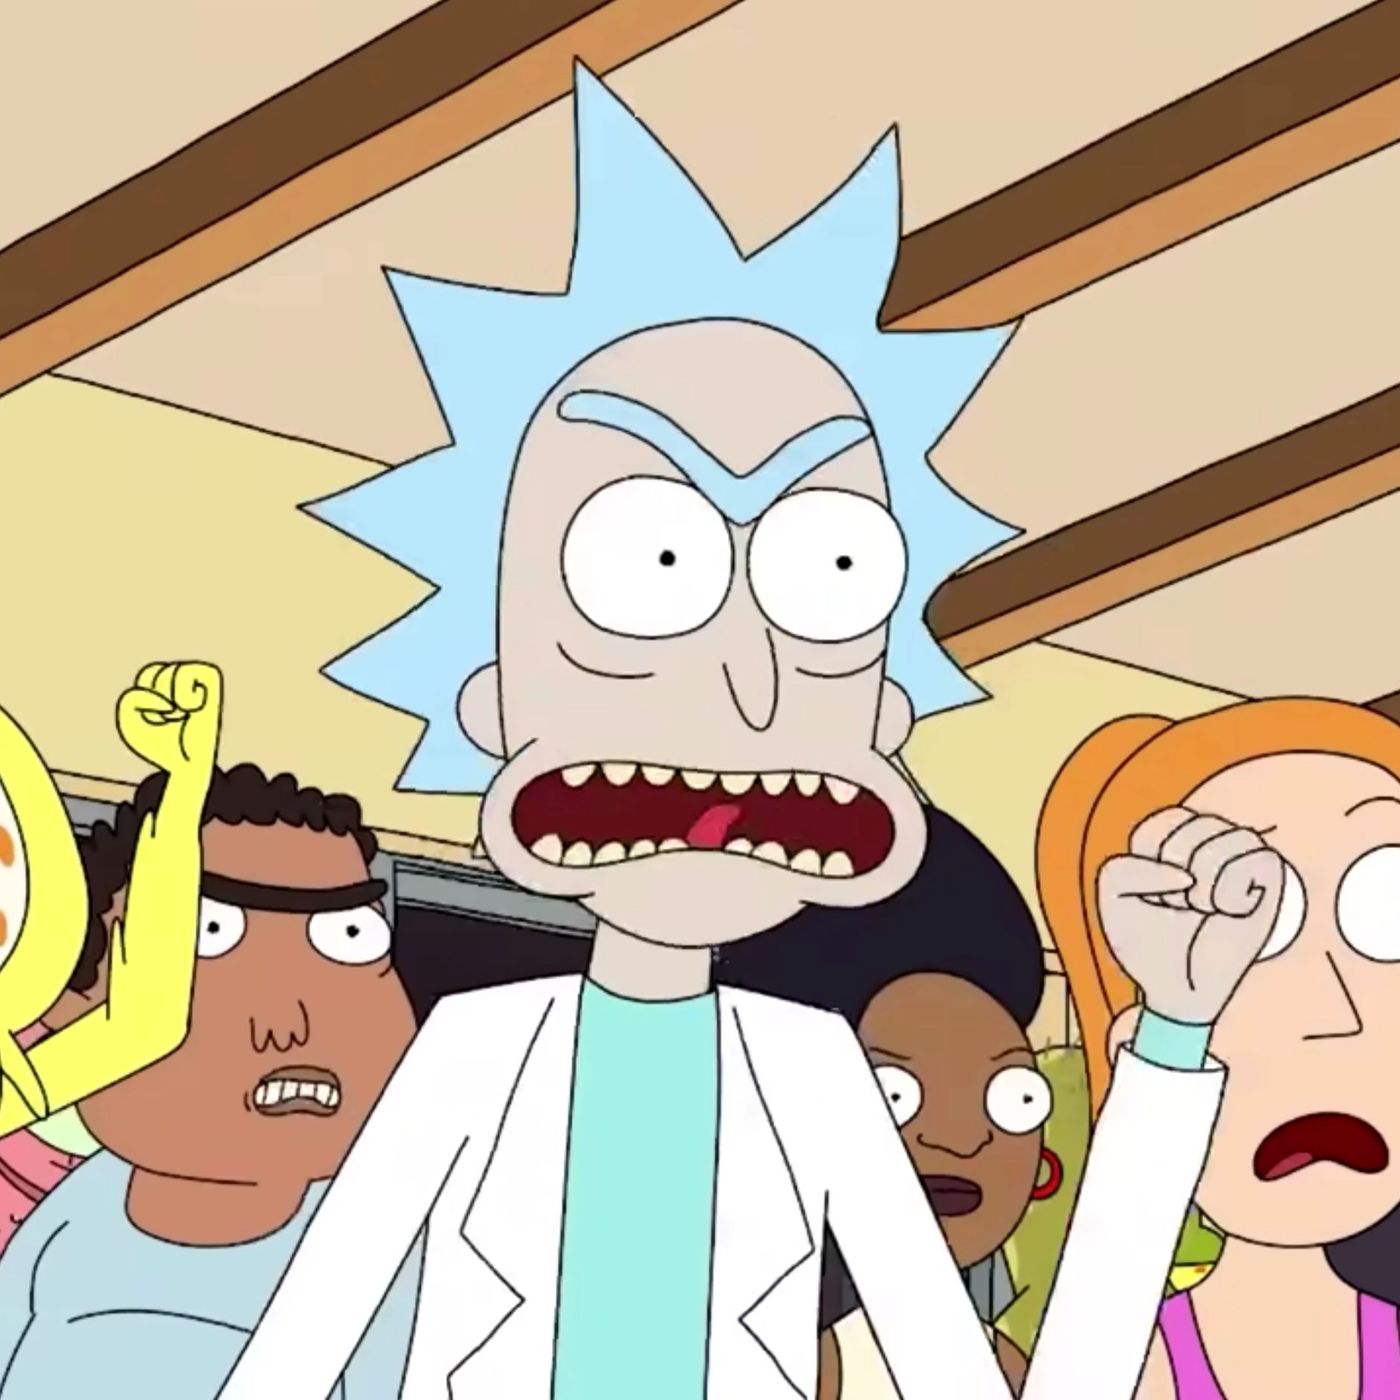 Who Is Voicing 'Rick and Morty' Instead of Justin Roiland?